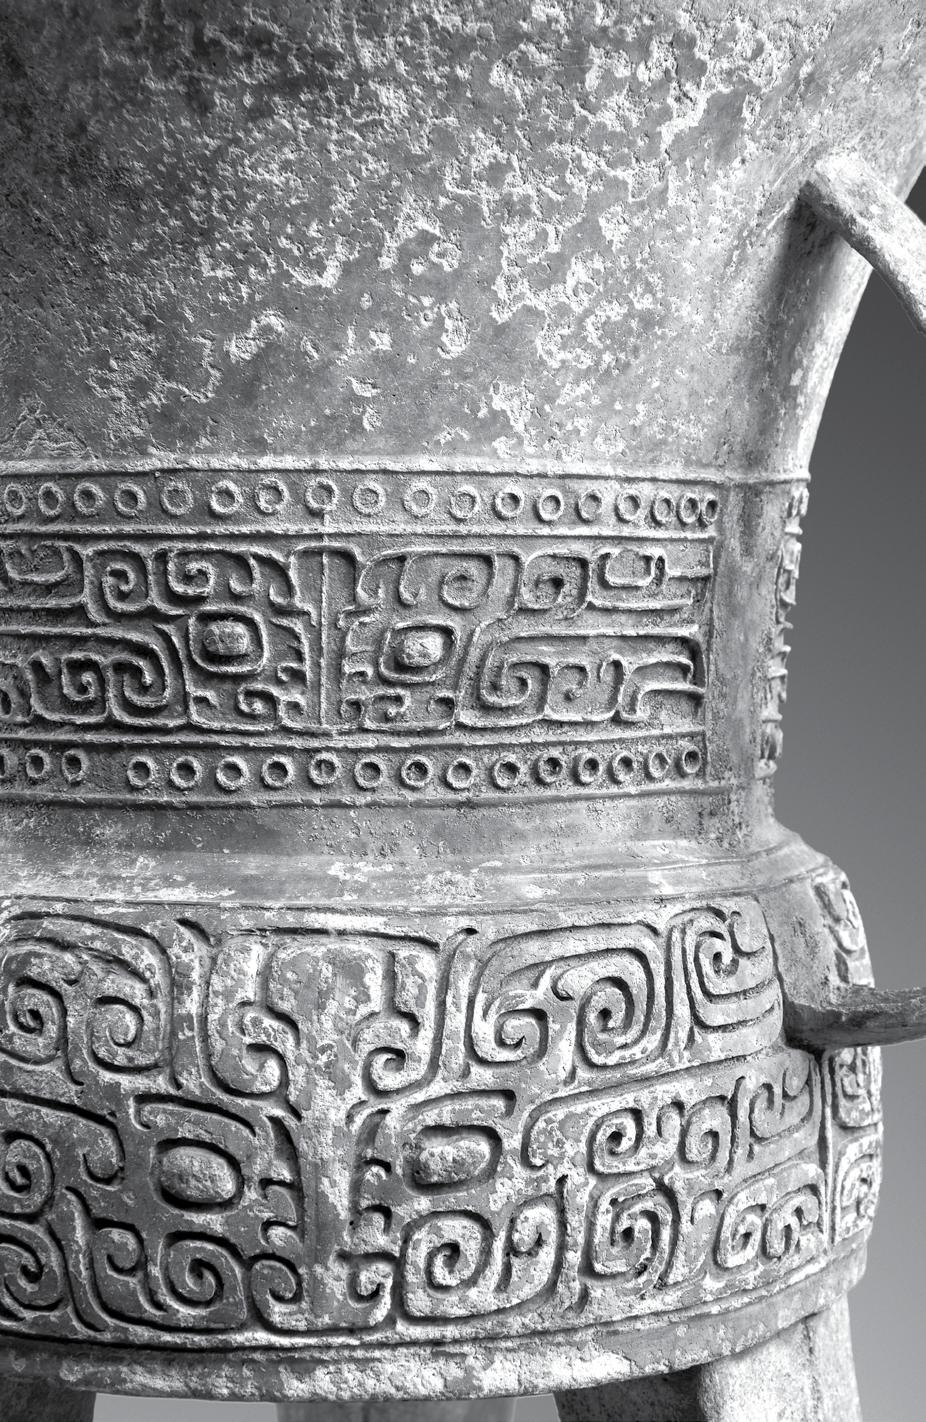 The Decorative Elements on Chinese Ritual Bronzes from the Xia 夏, Shang 商 and Zhou 周 Dynasties Two taotie masks